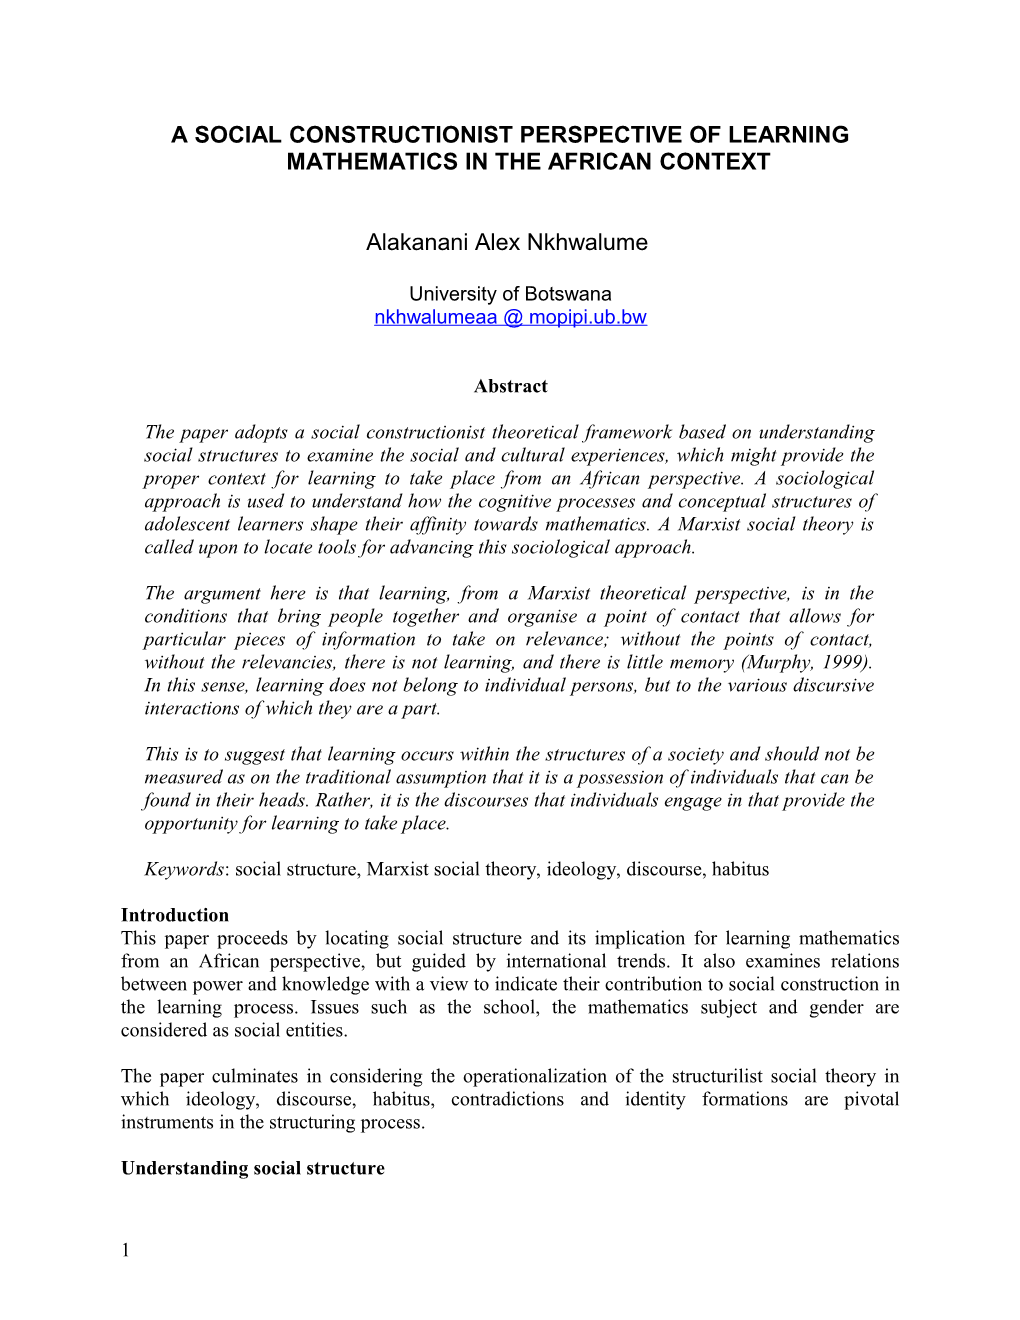 A Social Constructionist Perspective of Learning Mathematics in the African Context